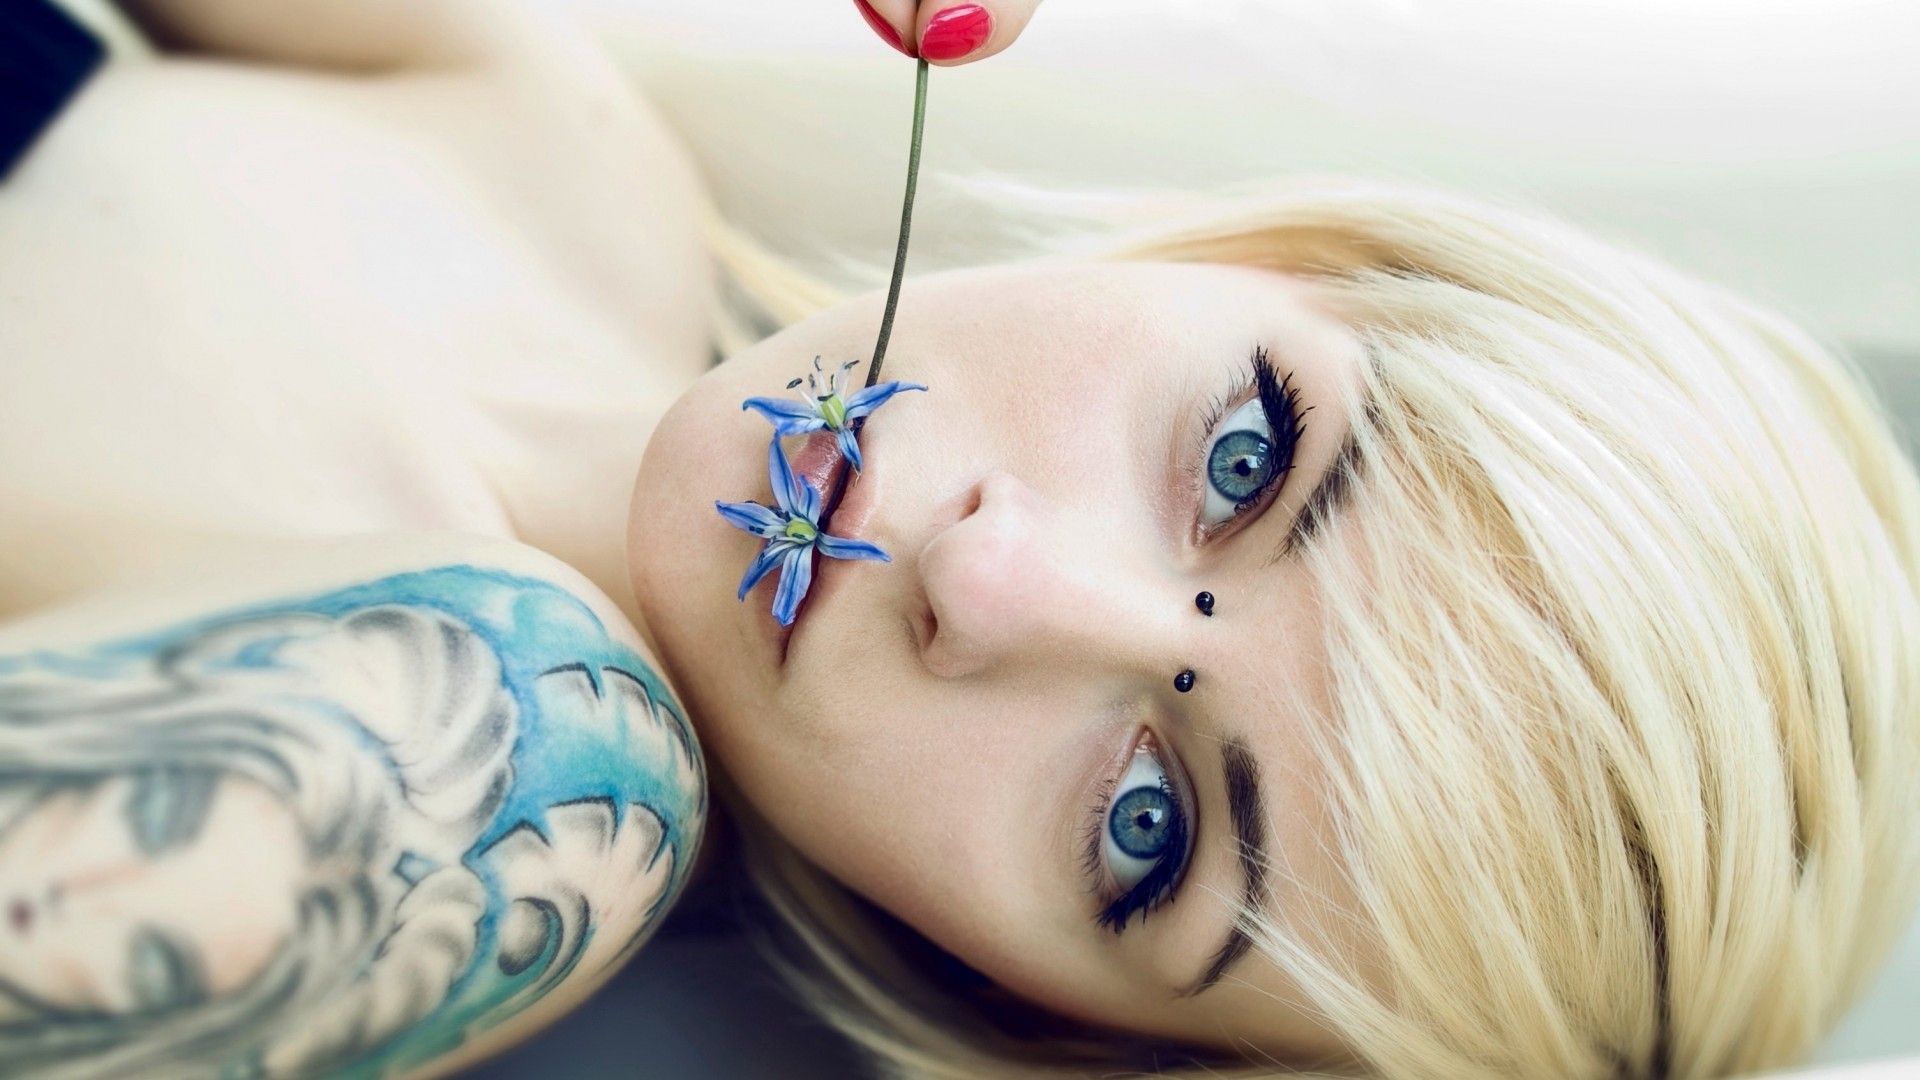 Most Beautiful Tattooed Girl Wallpaper | Full HD Pictures